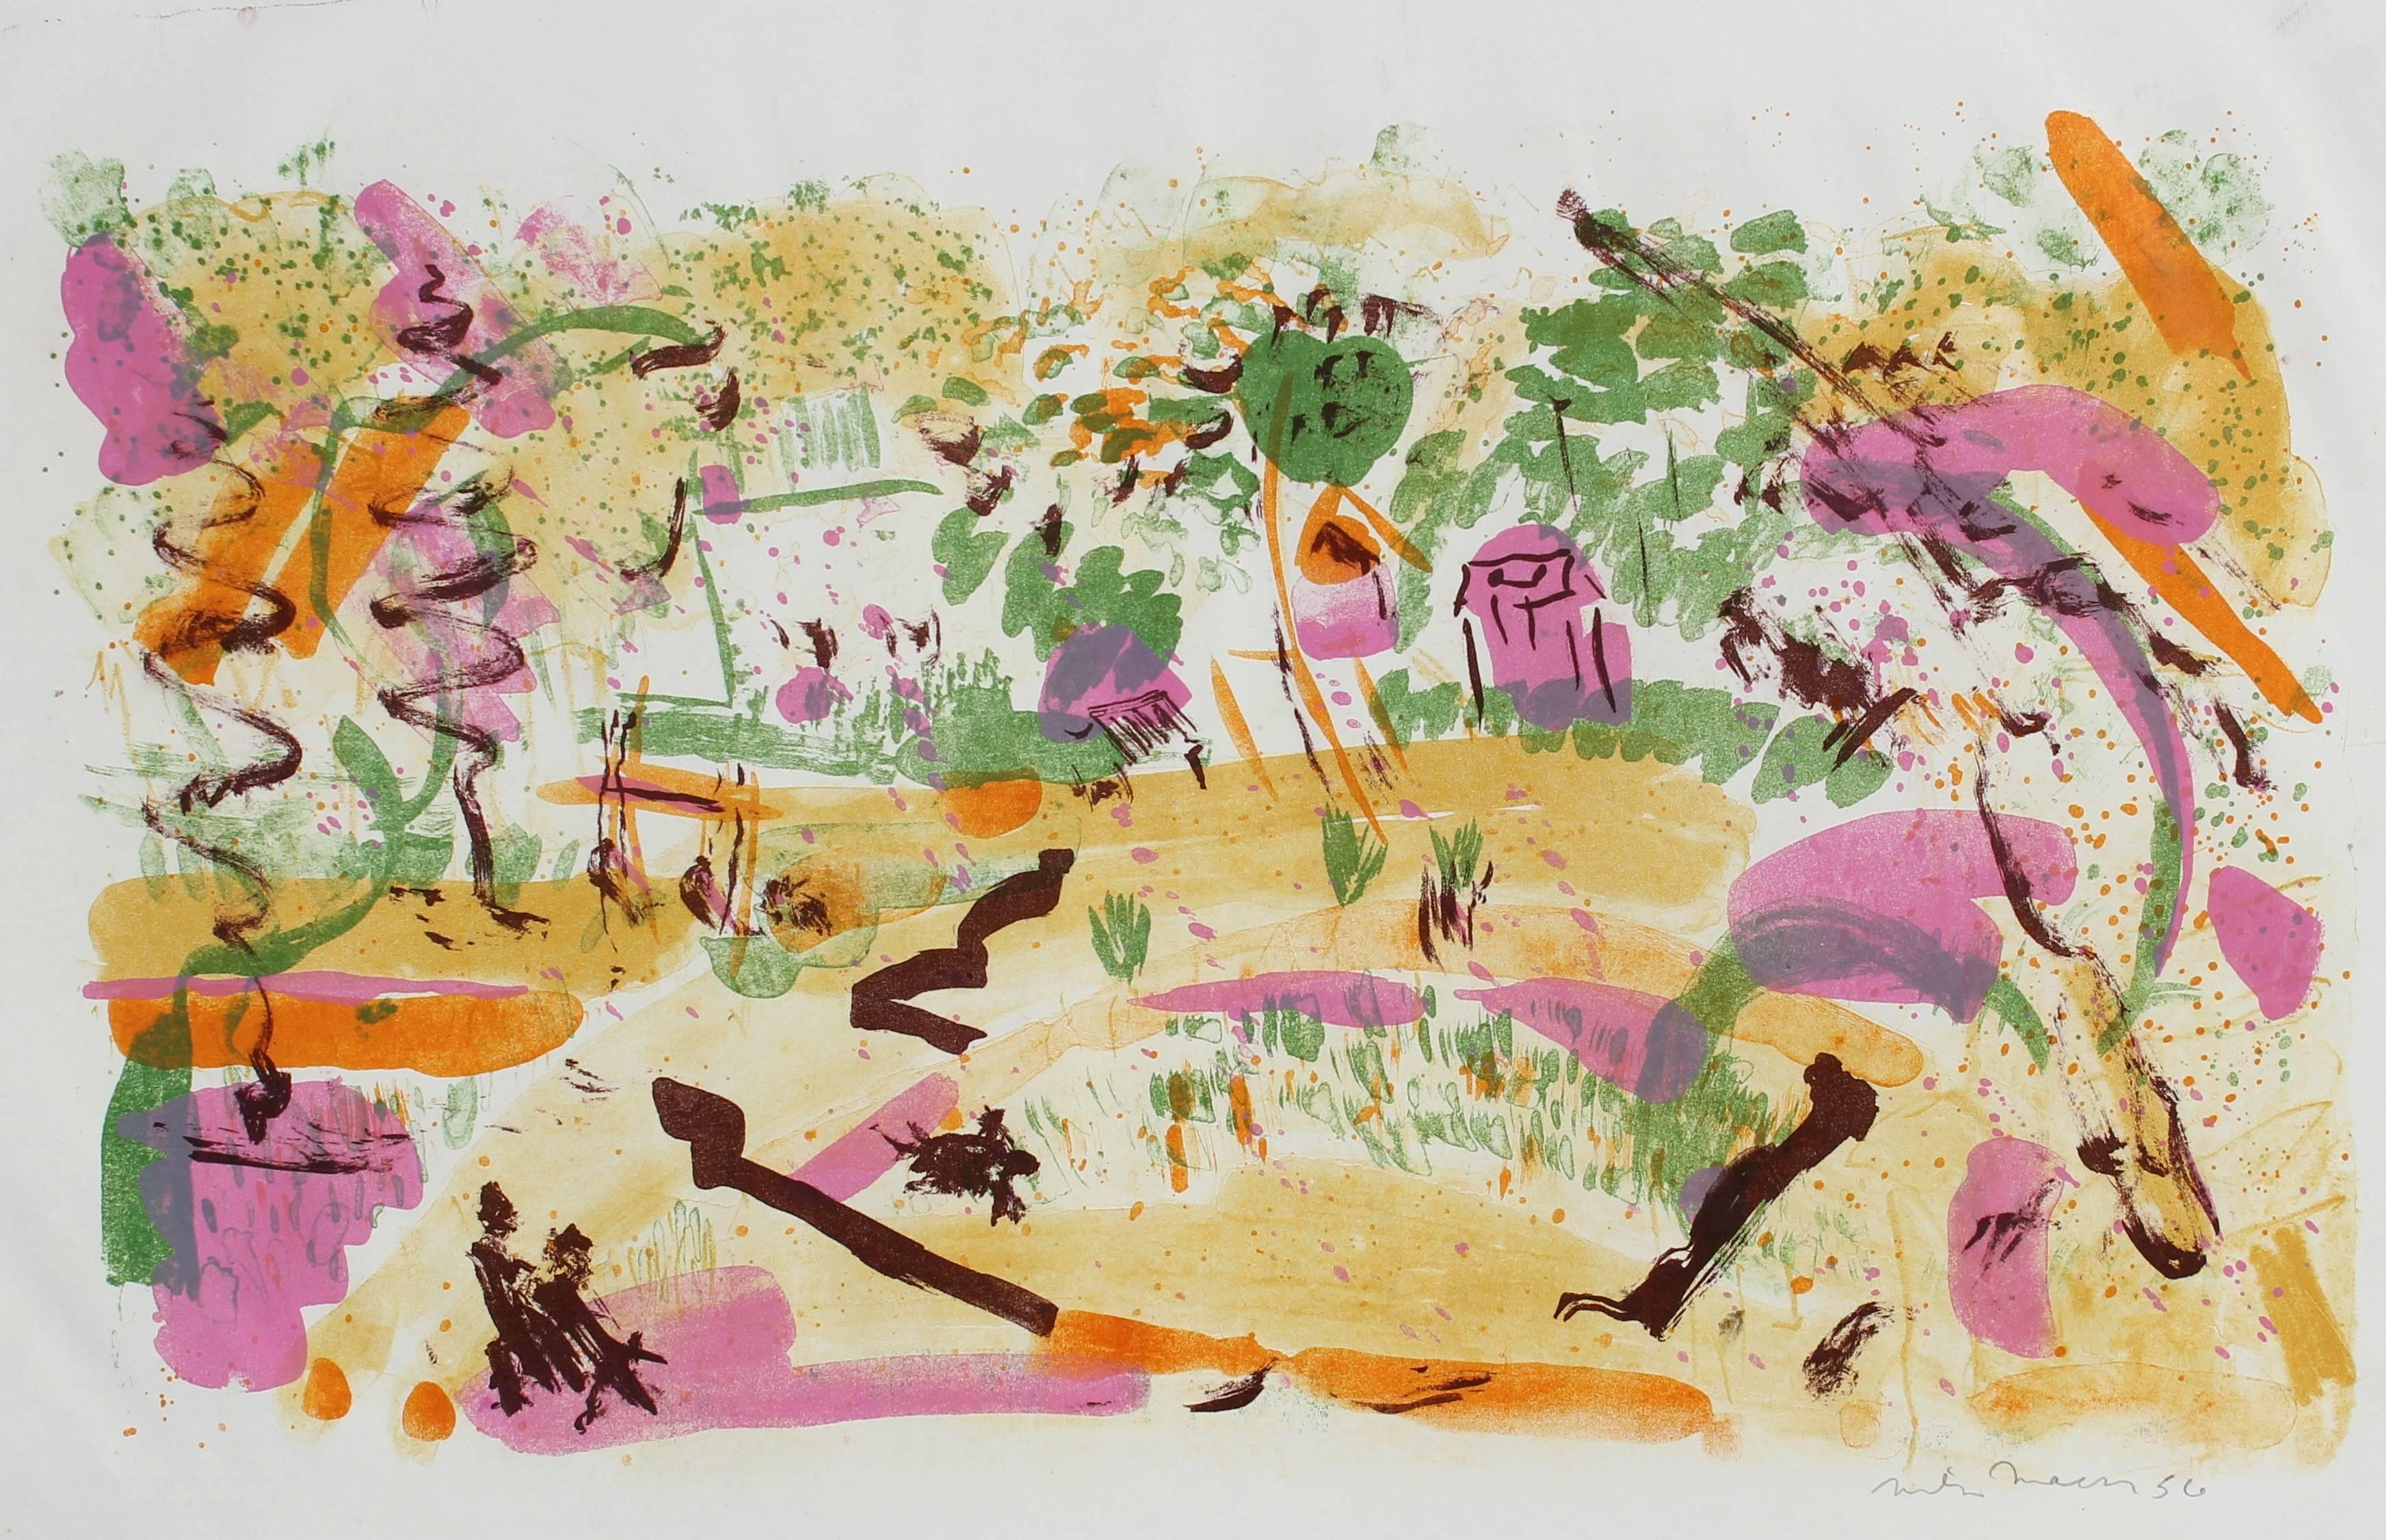 Michael L. Mason Abstract Print - Bright Abstracted Springtime Landscape Lithograph, 1956